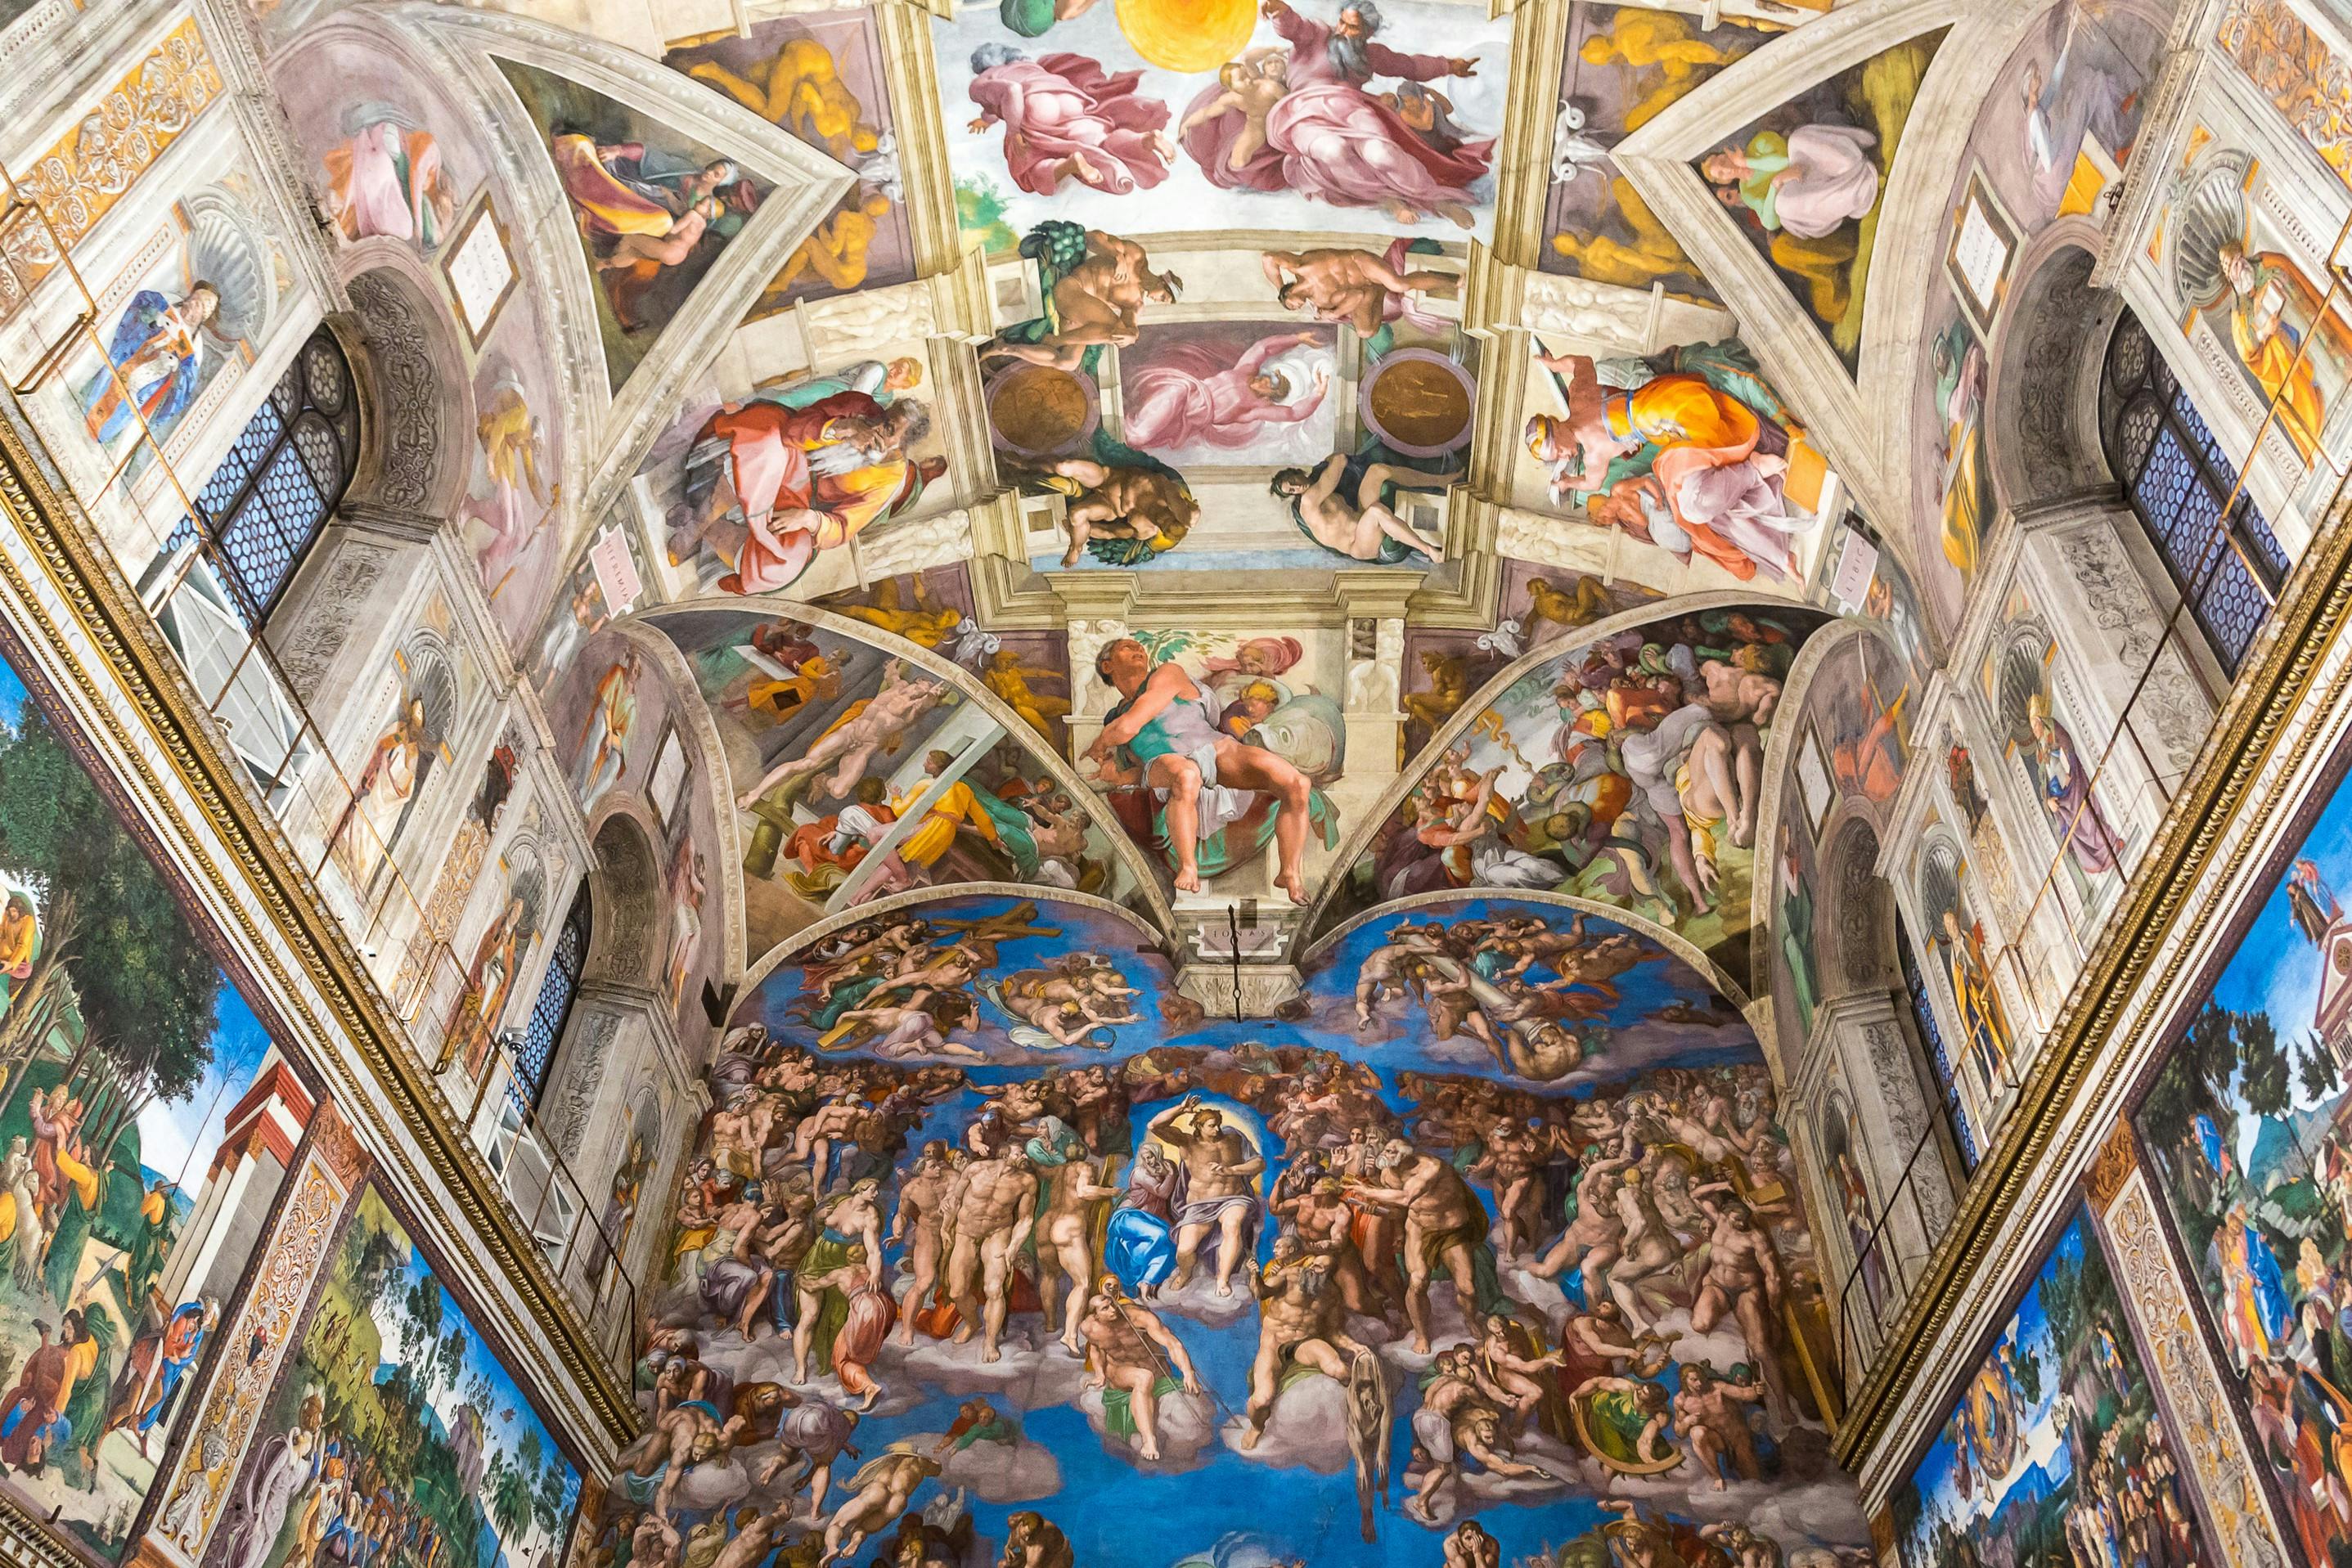 Skip-the-line tickets for the Vatican Museums and St. Peter's Basilica with audio guide